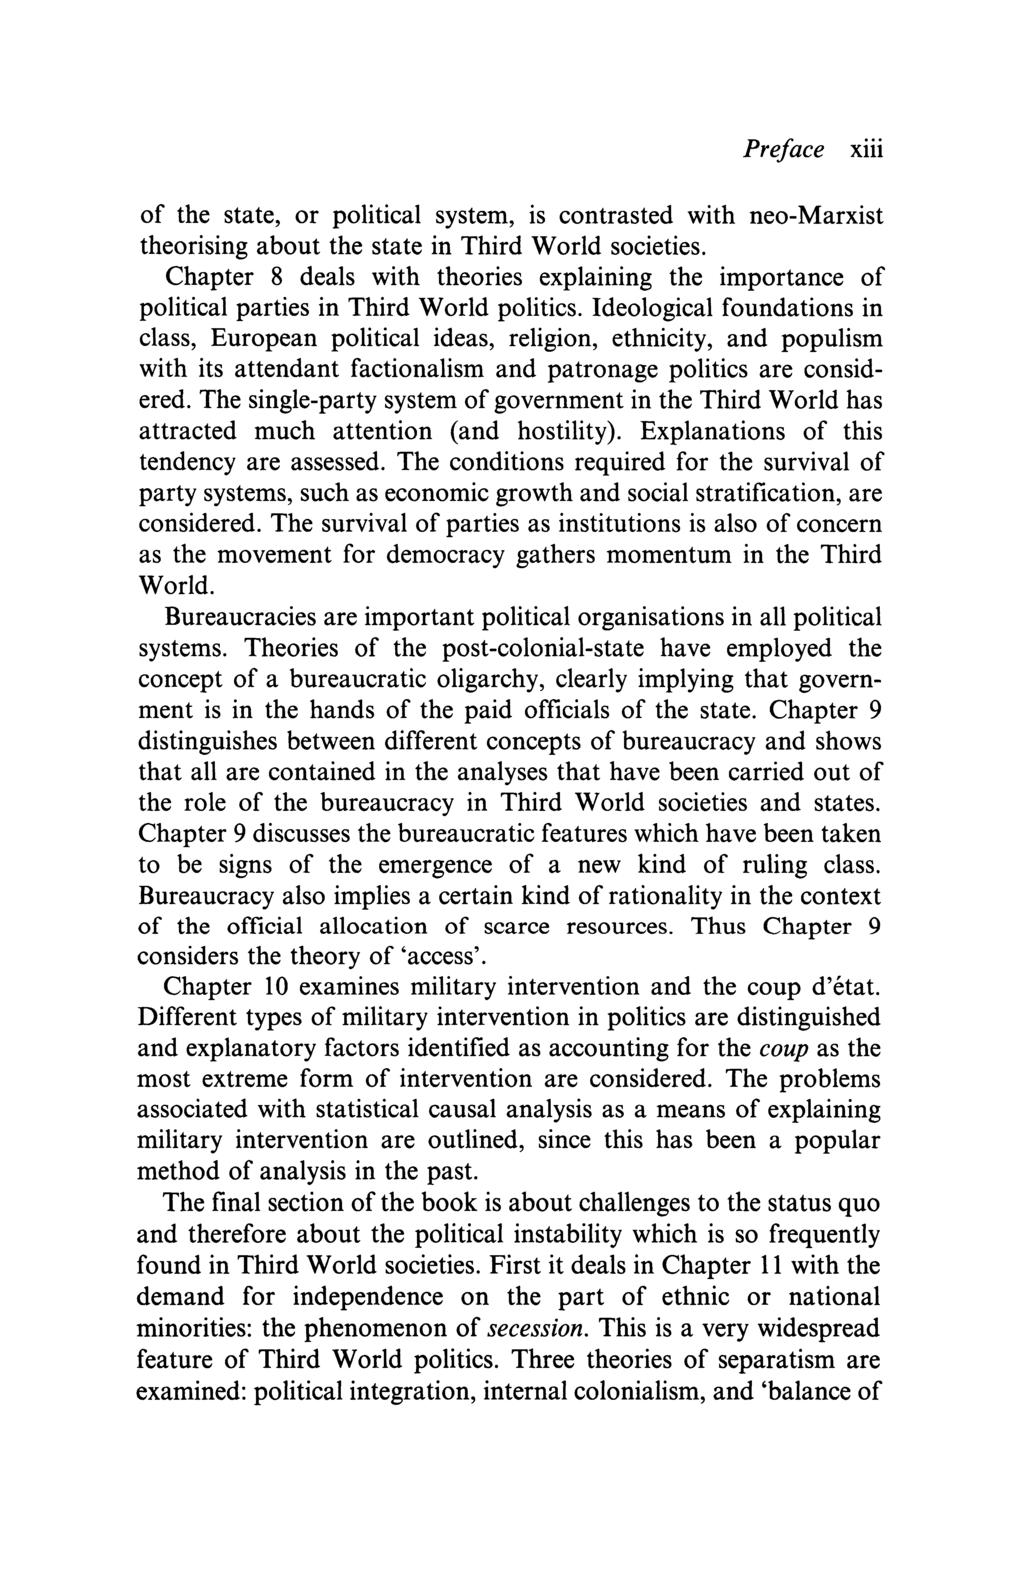 Preface X111 of the state, or political system, is contrasted with neo-marxist theorising about the state in Third World societies.